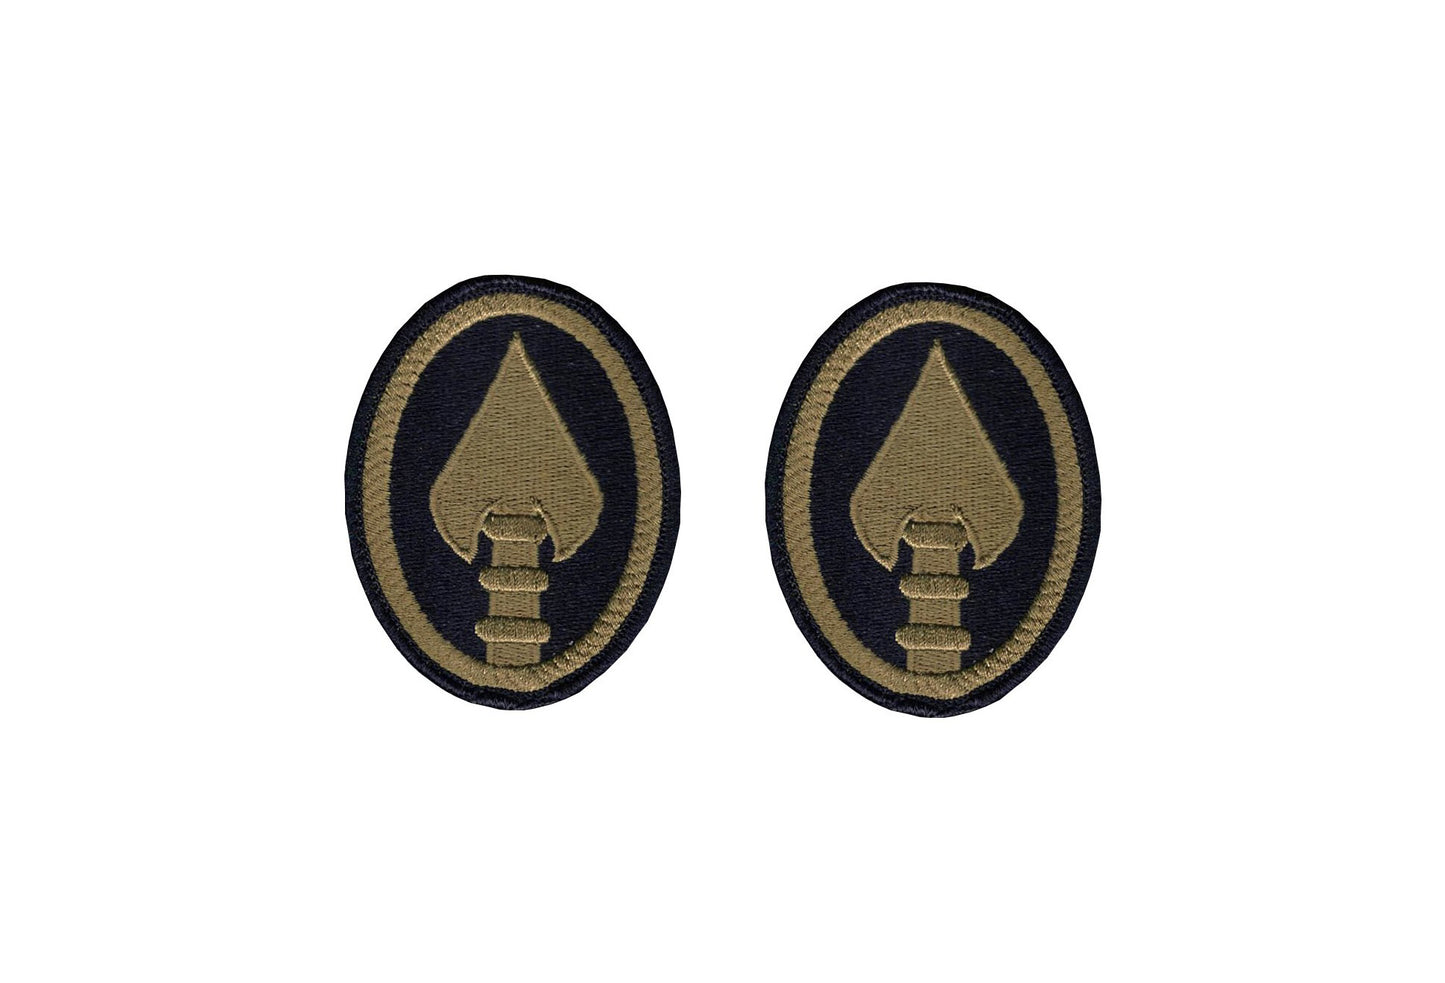 U.S. Special Operations Command (USSOCOM) OCP Patch with Hook Fastener (pair)